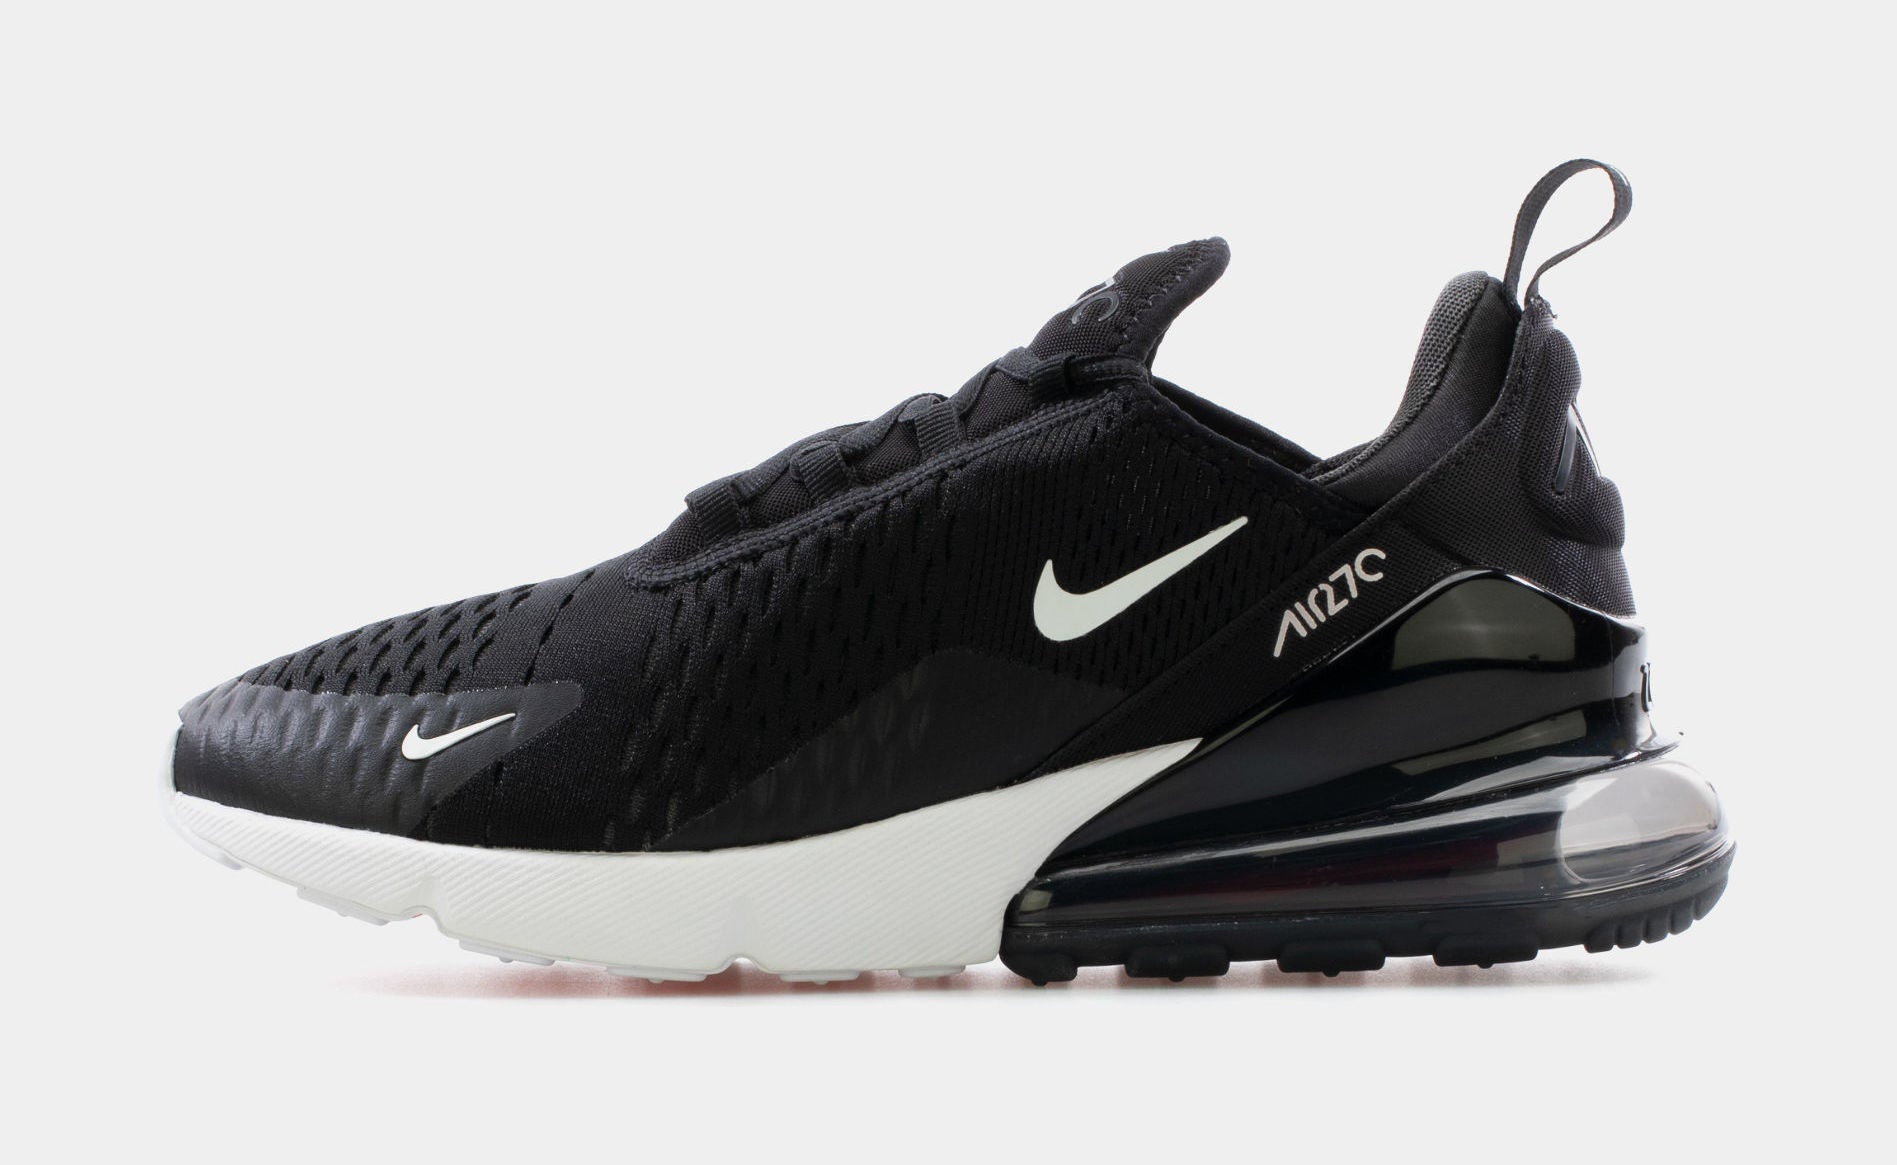 Nike's New Air Max 270 Sneaker Is the Best of Old and New